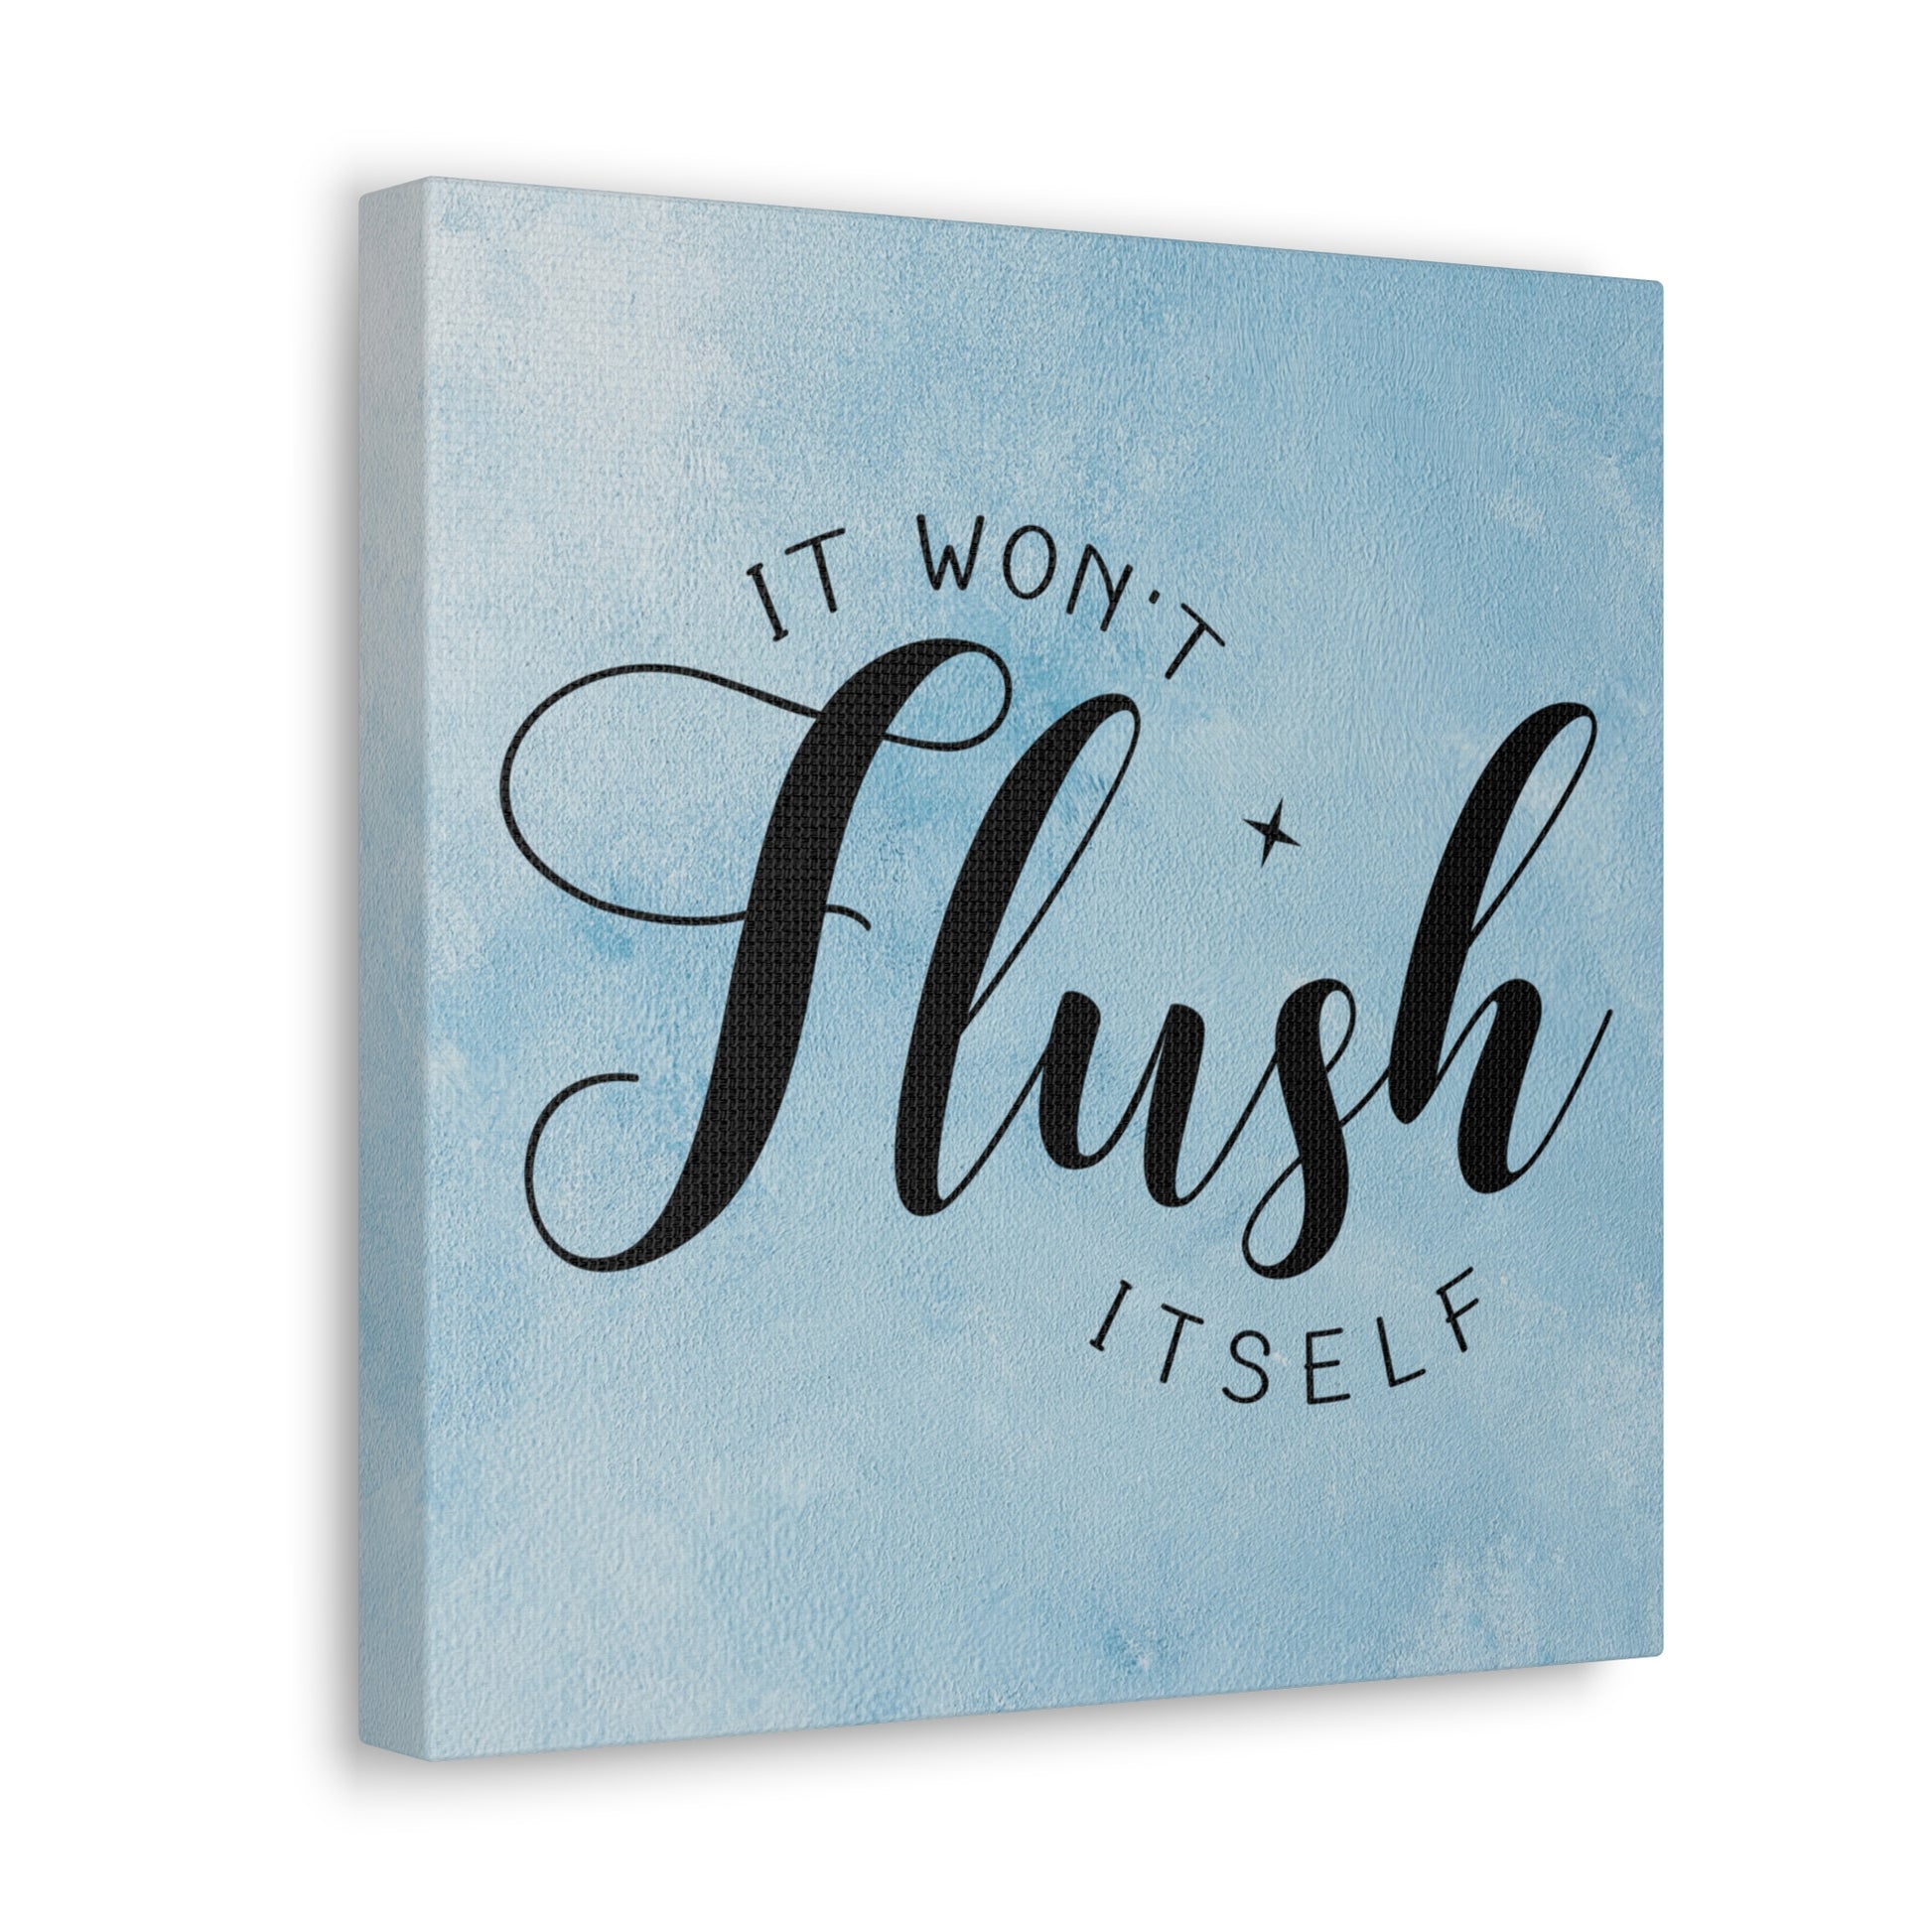 "It Won't Flush Itself" Wall Art - Weave Got Gifts - Unique Gifts You Won’t Find Anywhere Else!